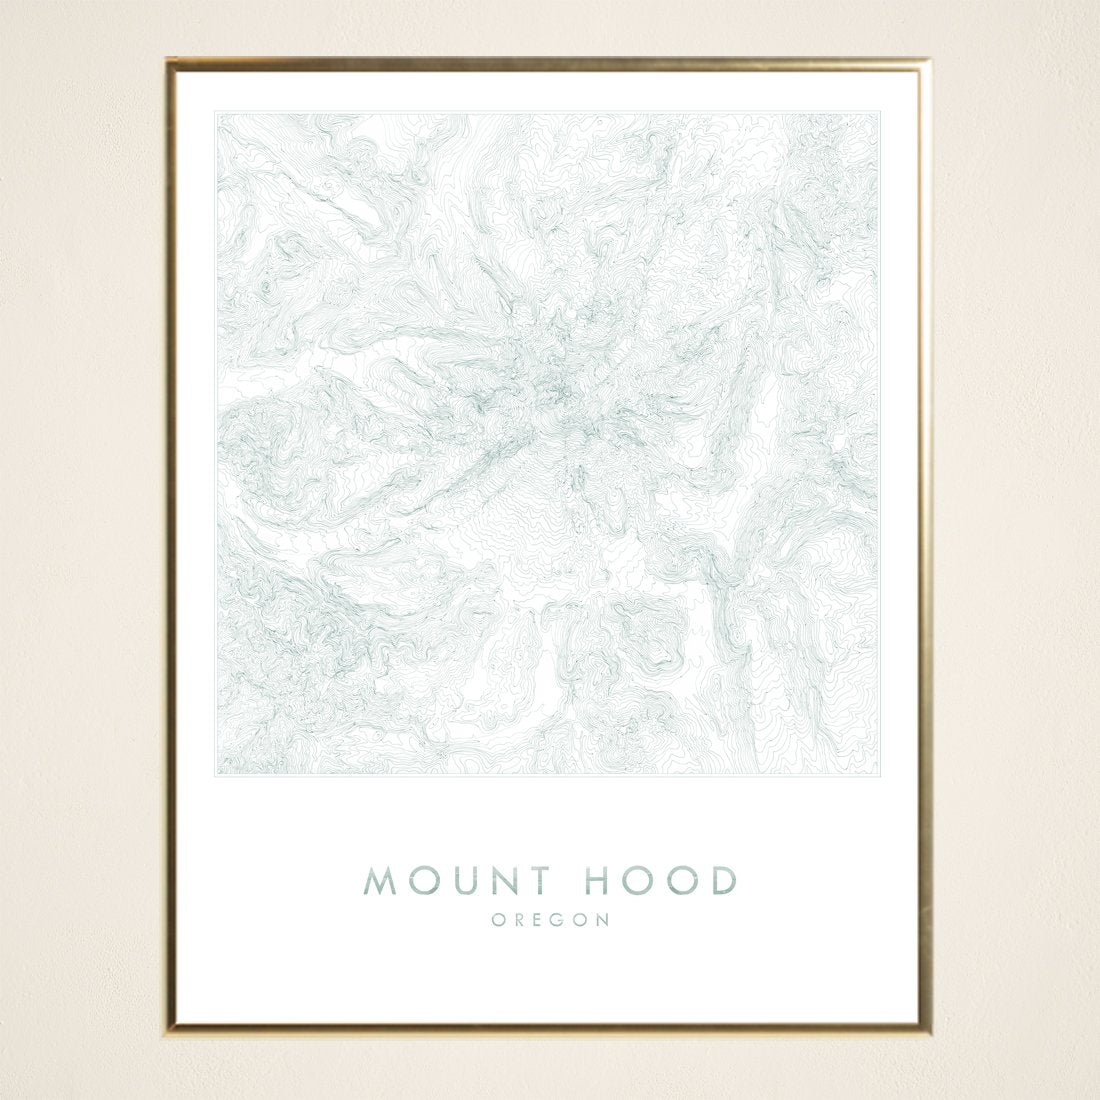 WY'EAST Mount Hood Oregon Topographical Map Drawing: PRINT